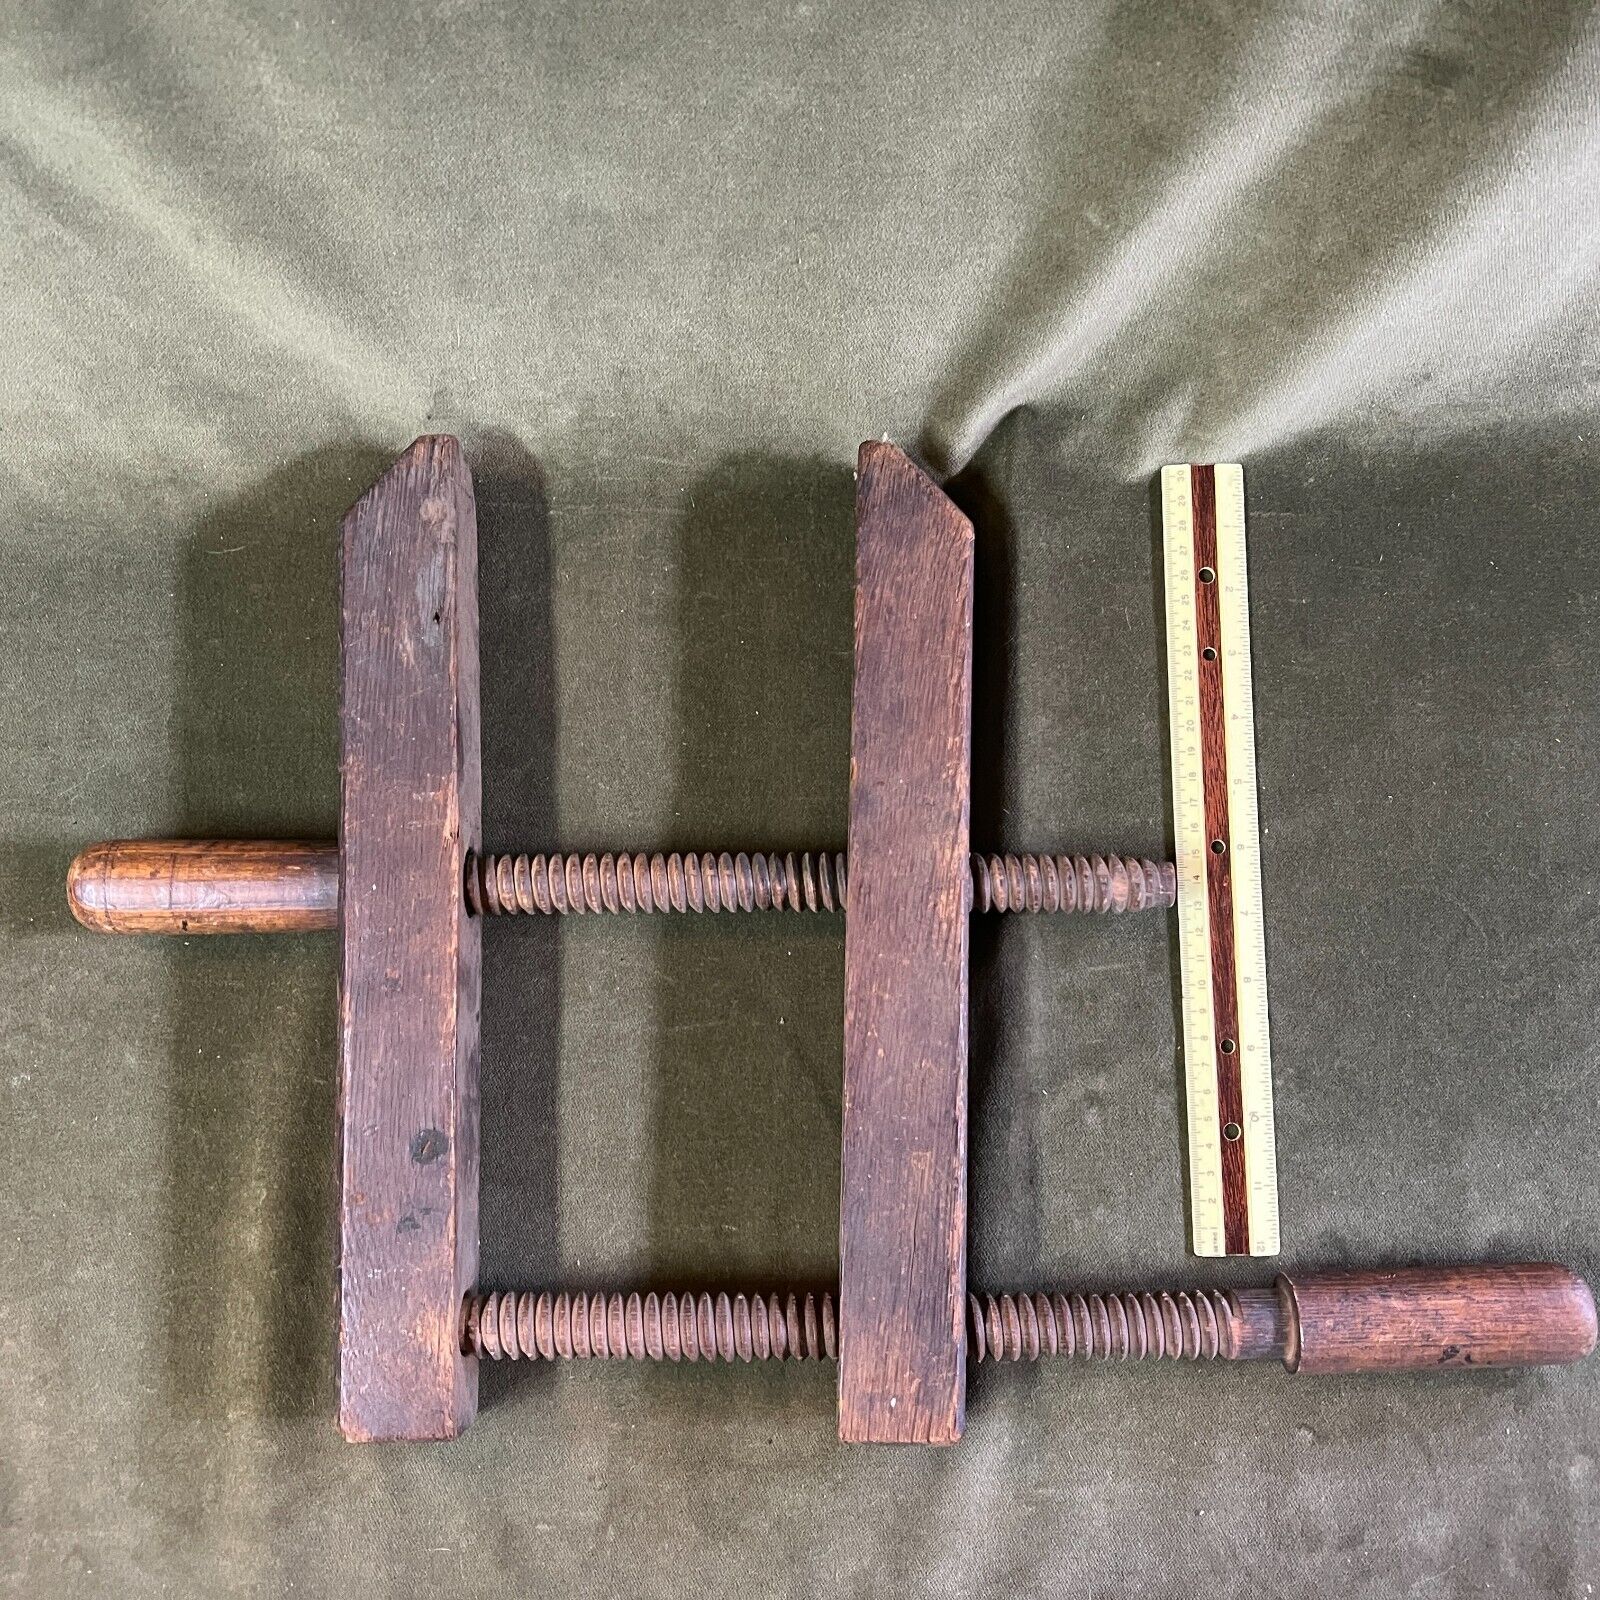 Vintage USA  Adjustable Hand Screw Wood Clamps Unbranded - Wood Threads  (#3)